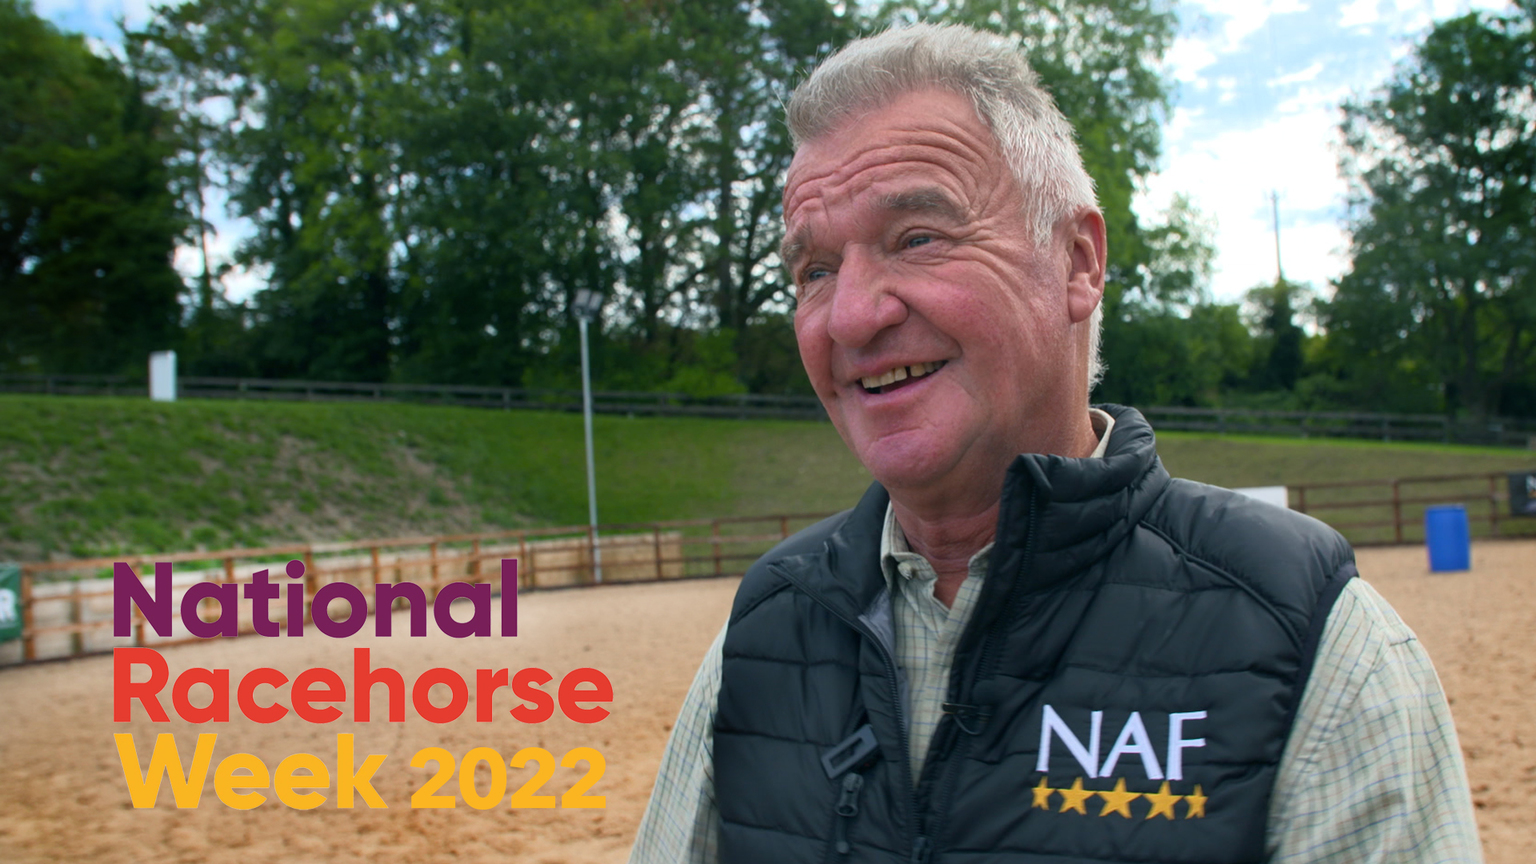 National Racehorse Week on H&C with NAF